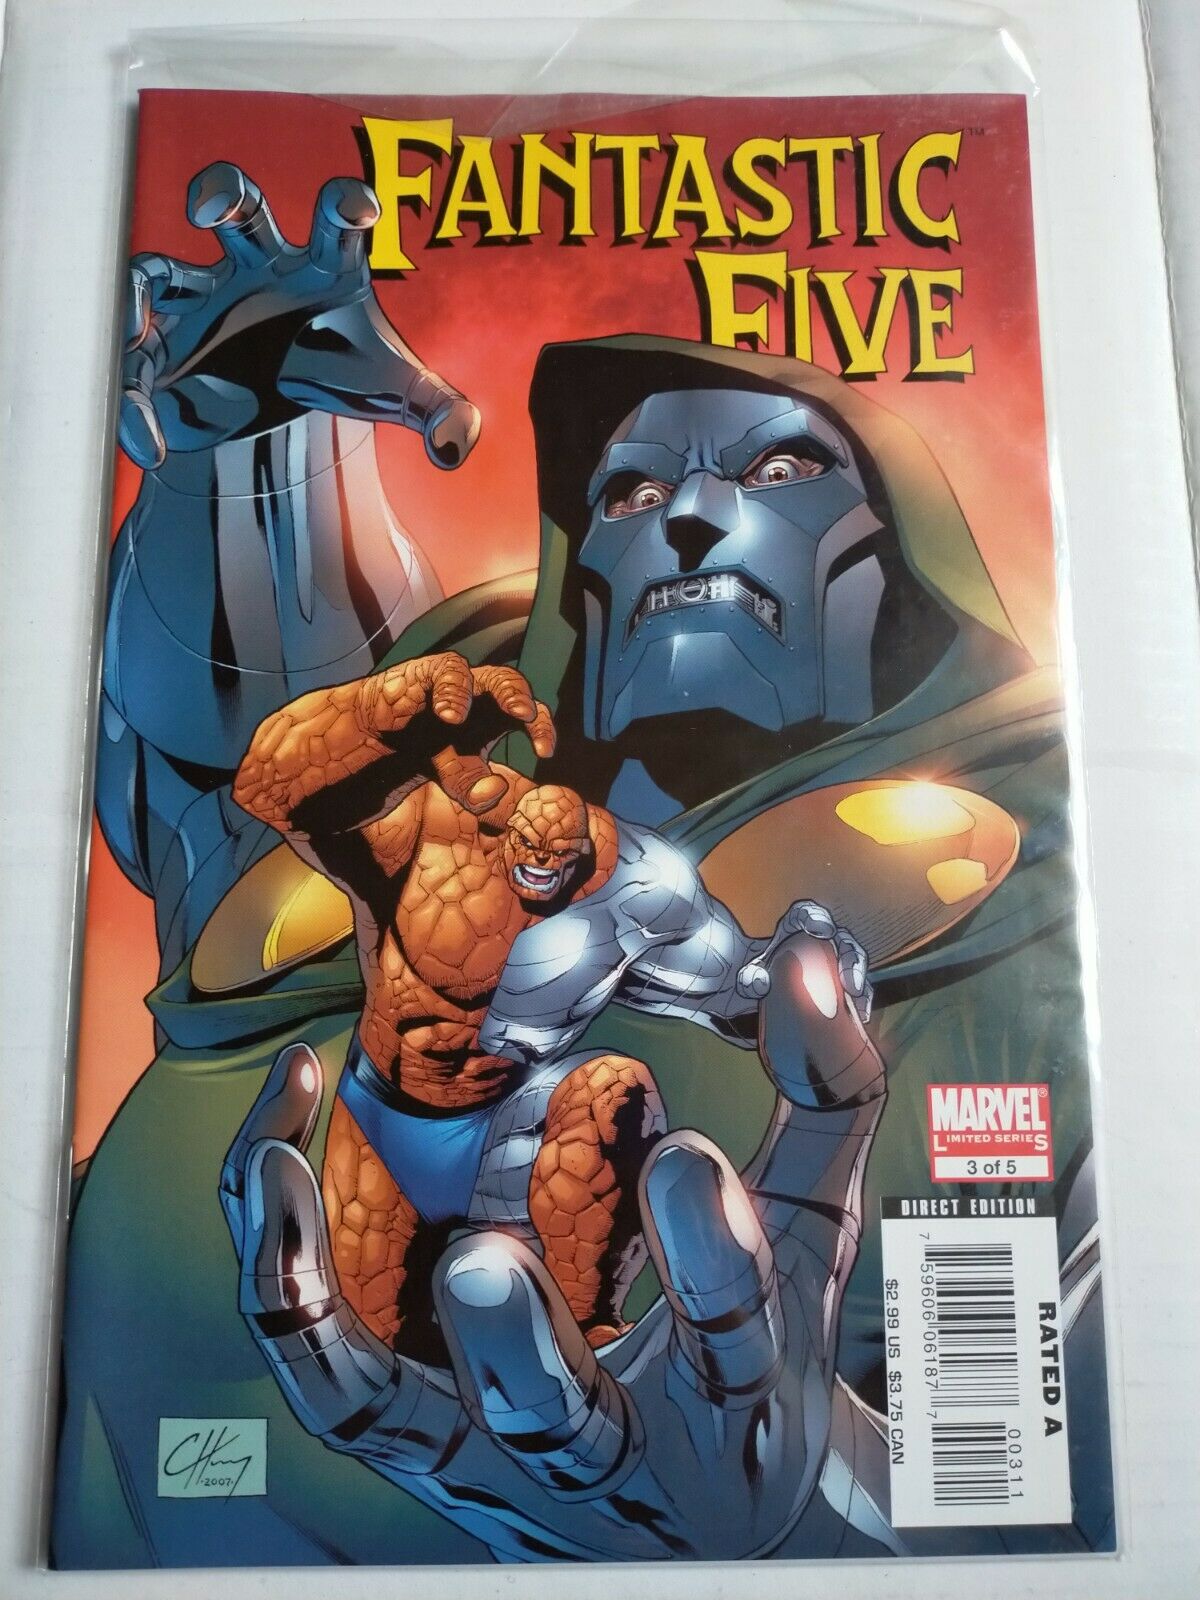 Marvel Comic Book Fantastic Five Limited Series No.3 of 5